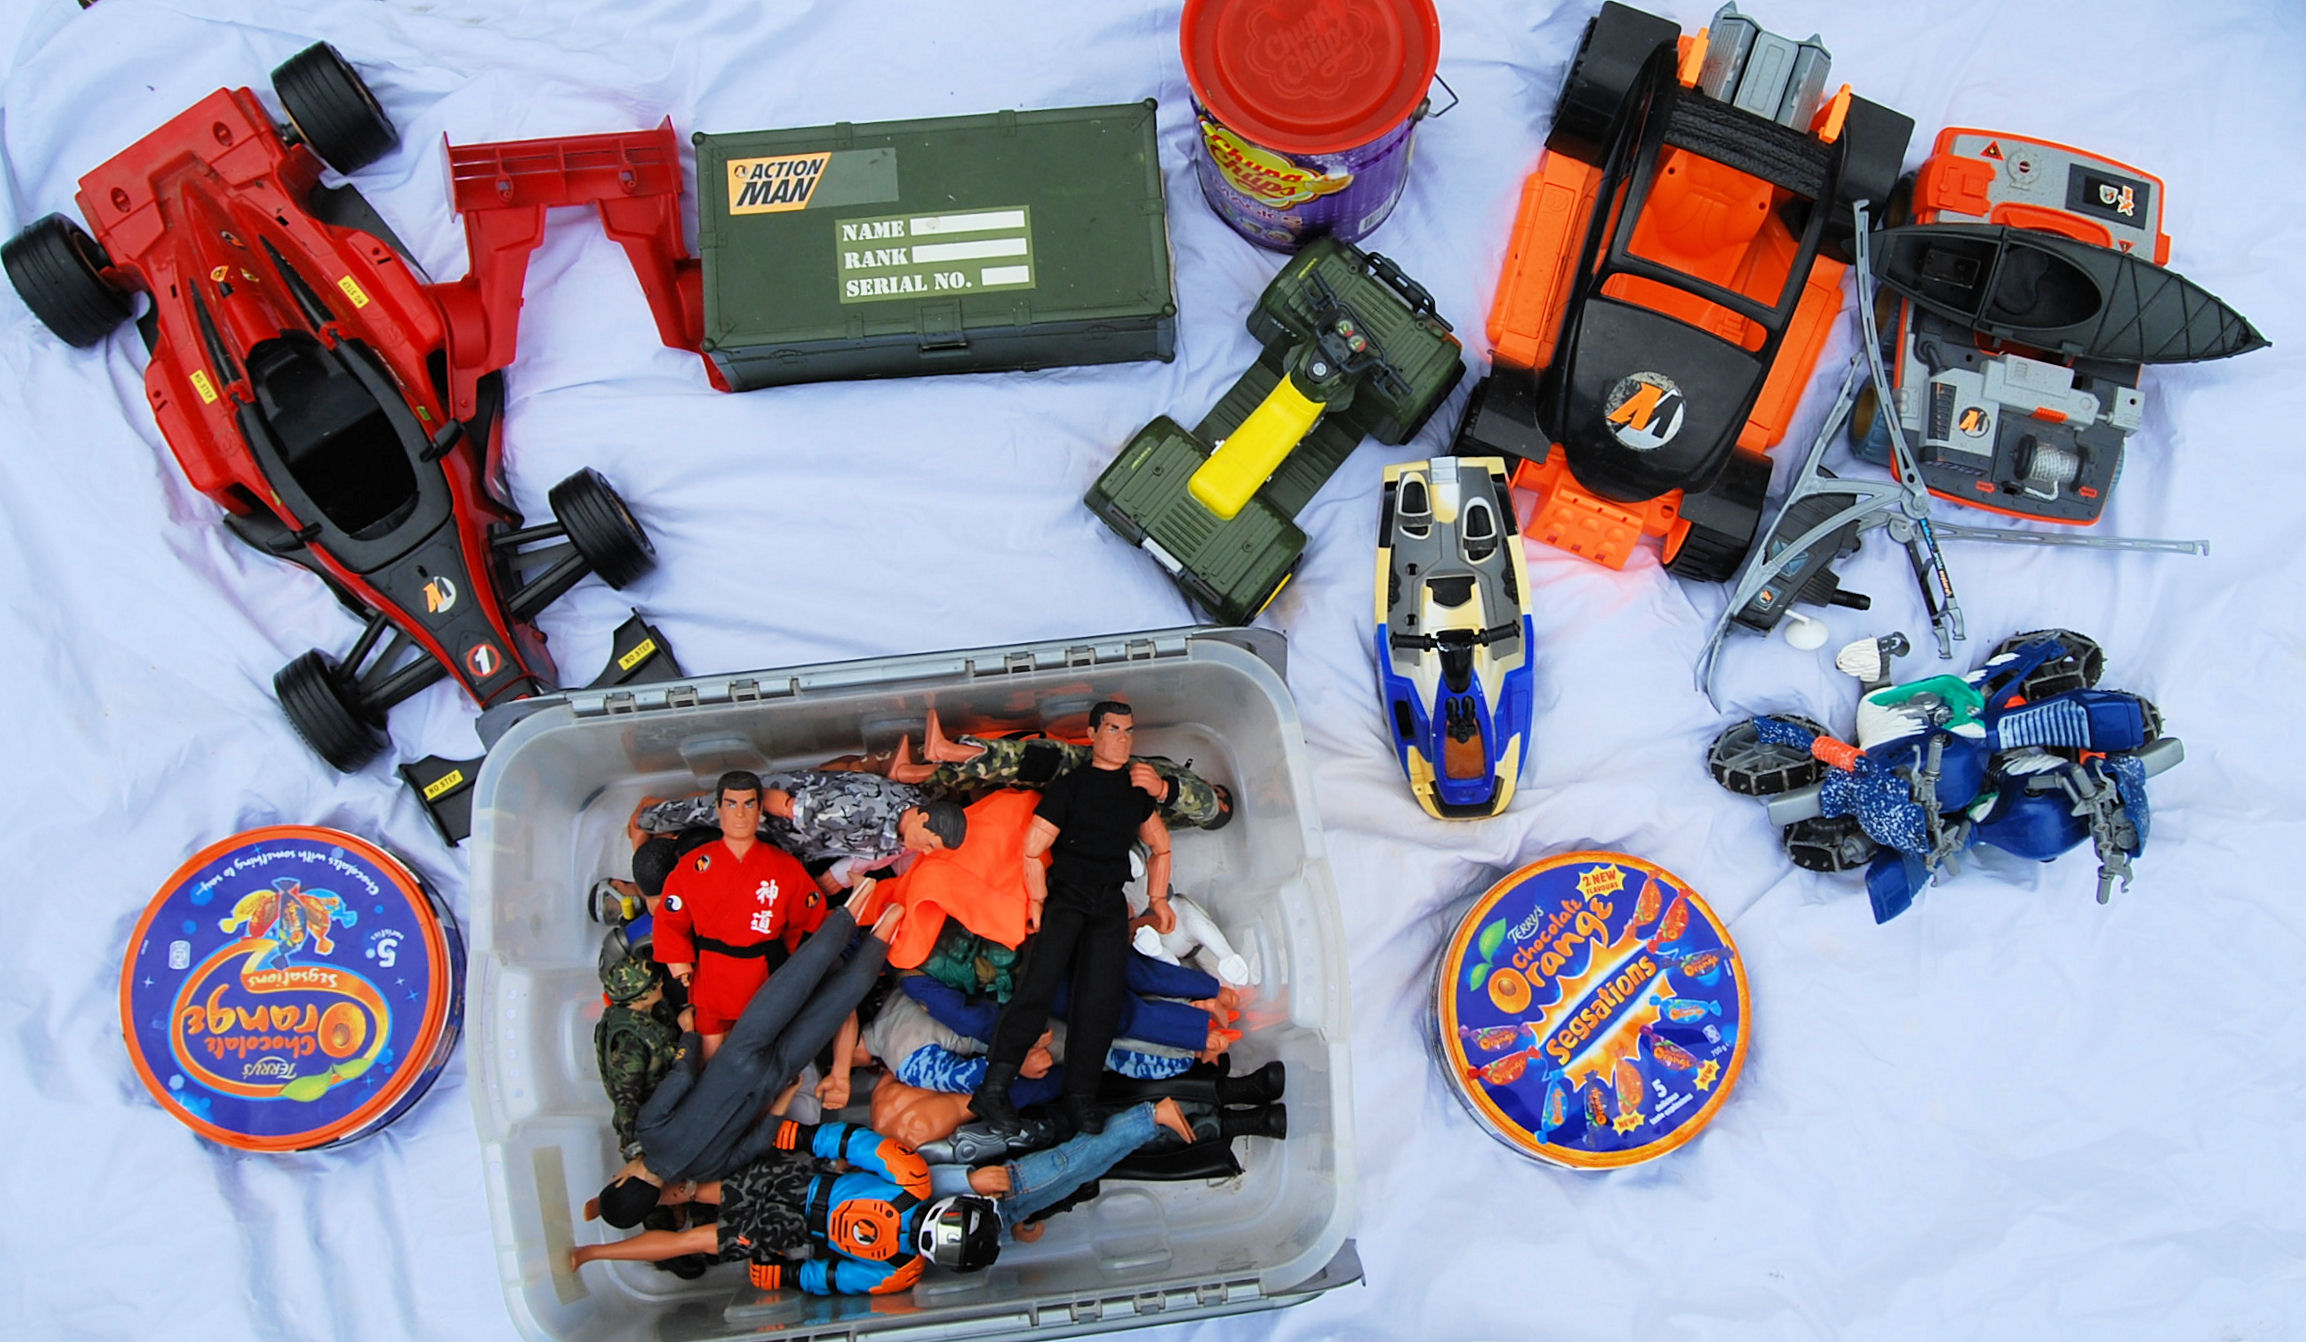 ACTION MAN; A LARGE collection of Action